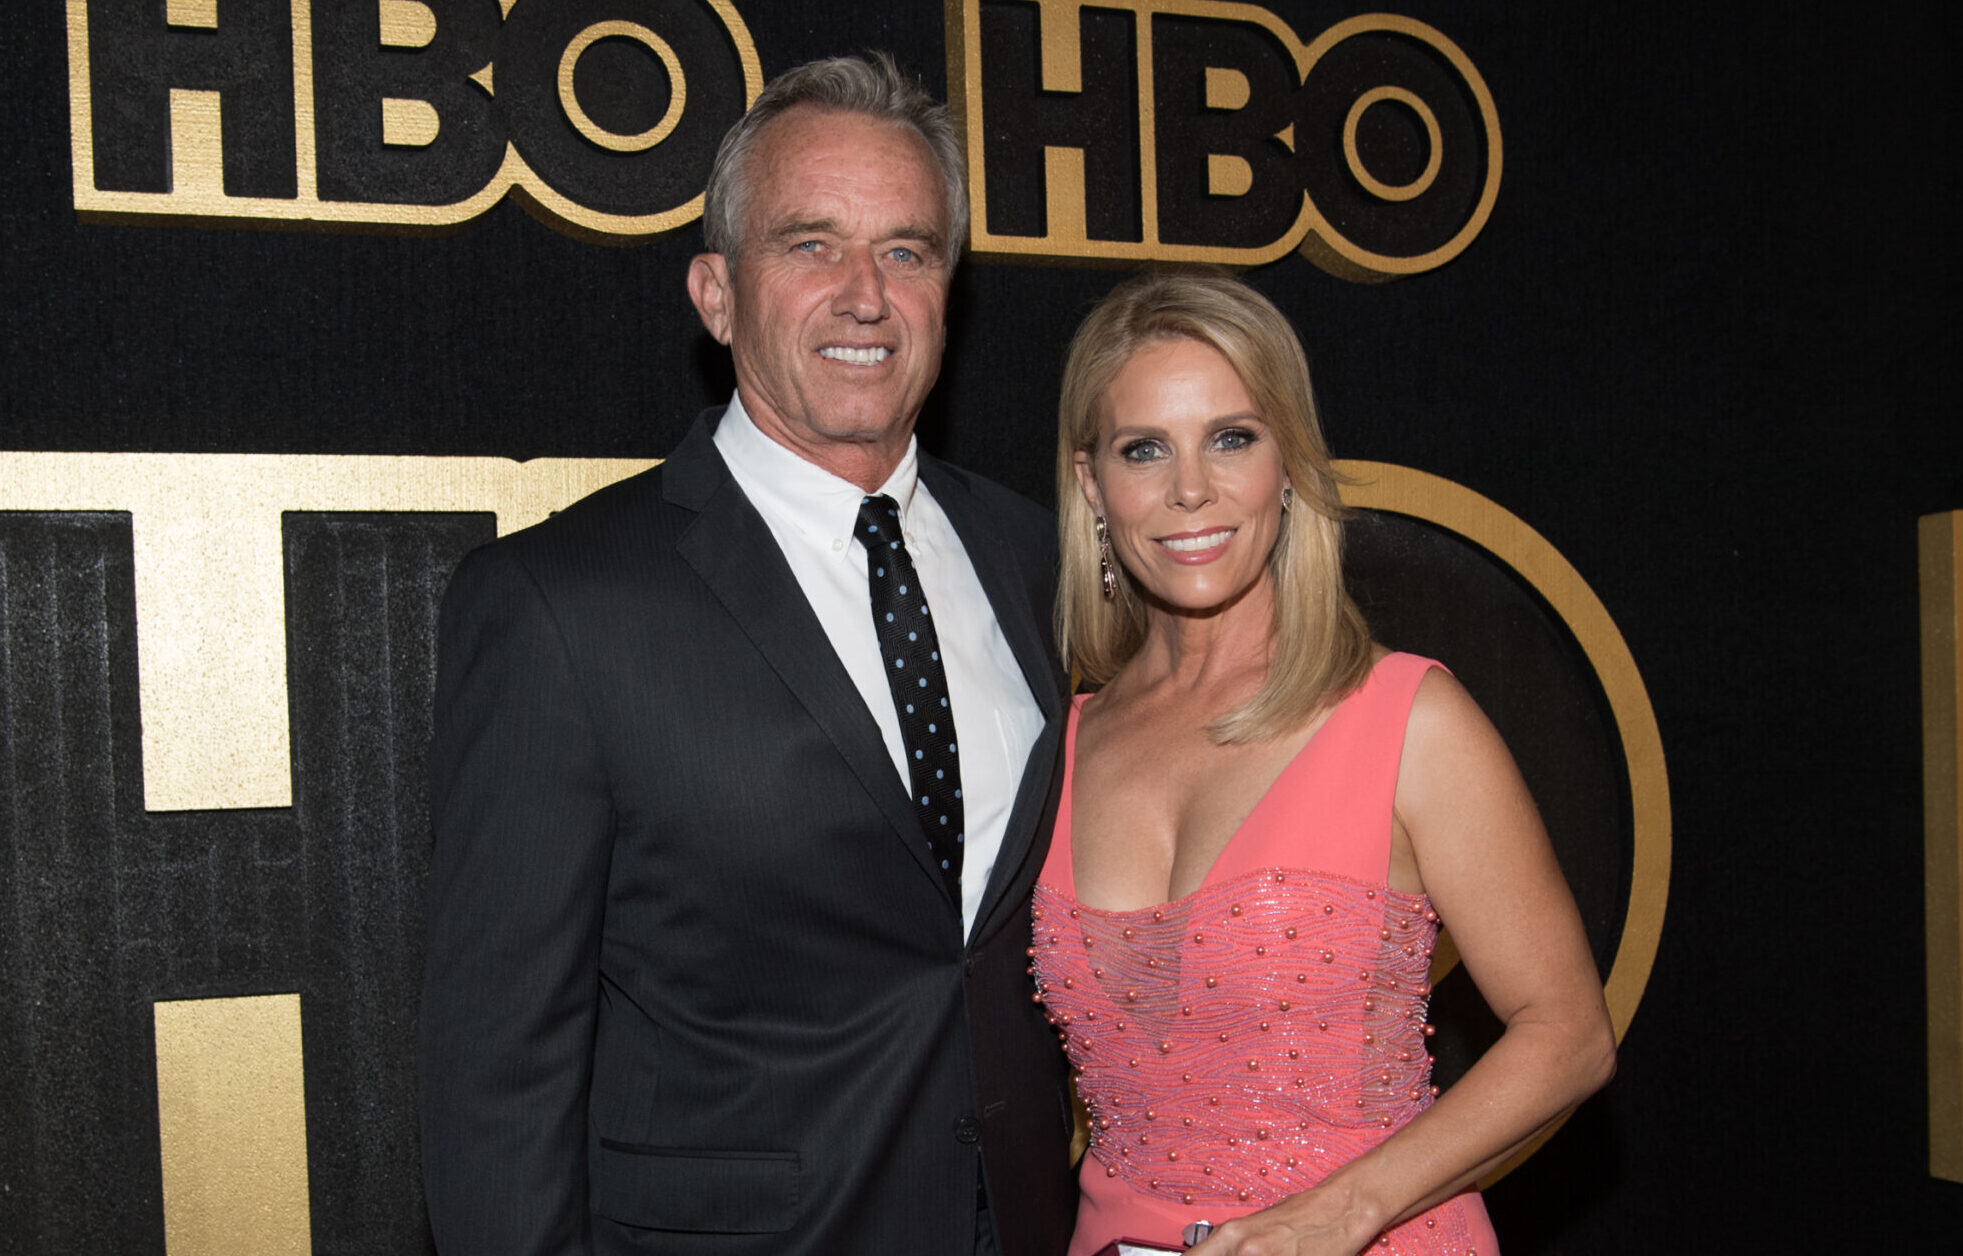 Curb Your Reaction: Cheryl Hines Breaks Silence on Husband’s Vaccine Mandates-Holocaust Comparison